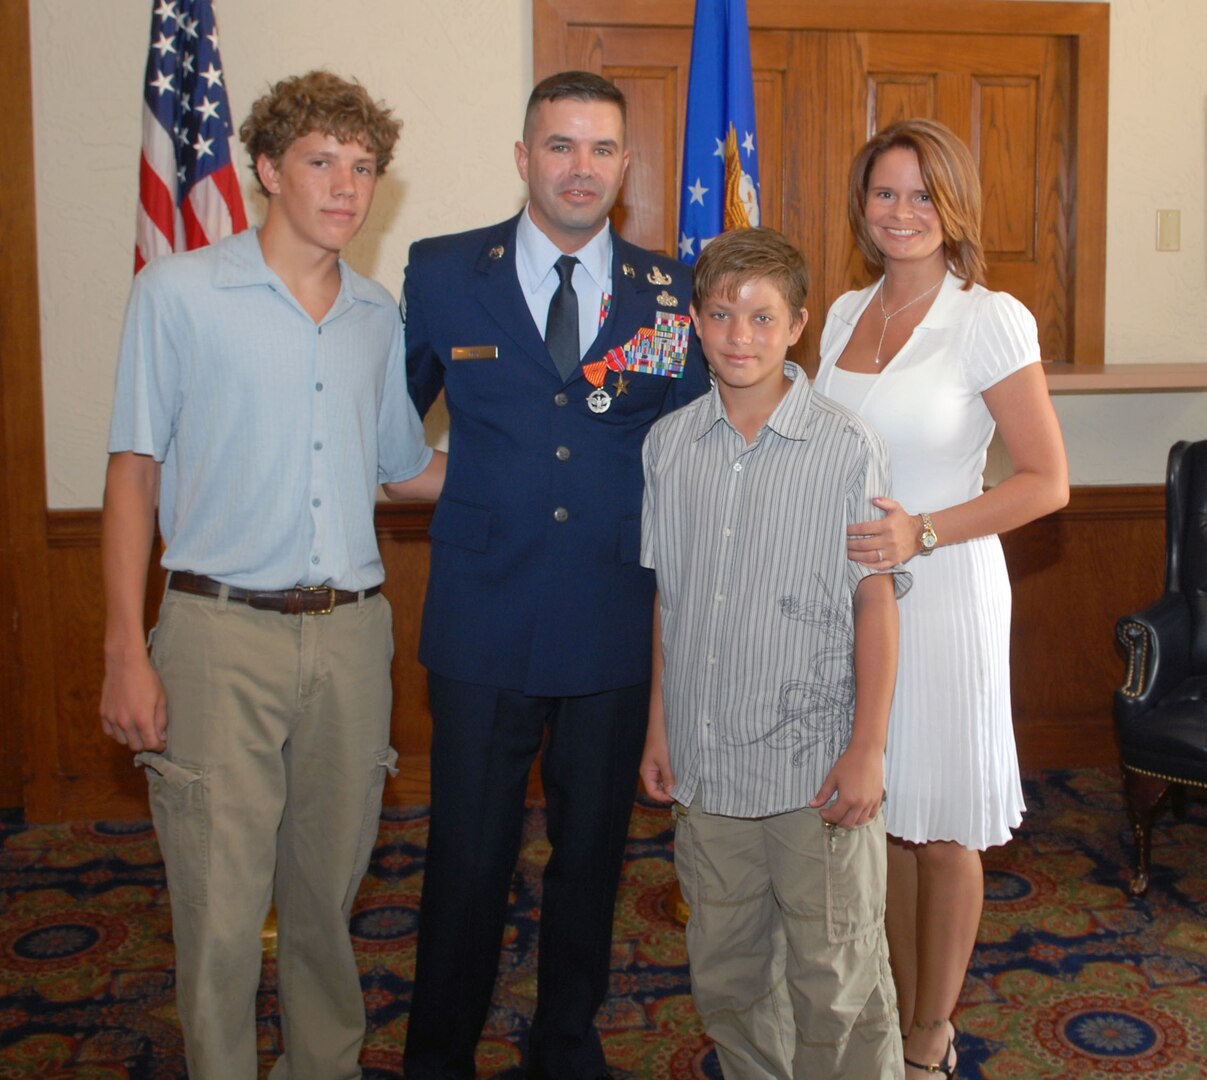 The Mays (From left) -- Joseph III, Chief Master Sgt. Joseph May Jr., James and Veronica pause for a family photo after his triple crown ceremony Aug. 1. During the ceremony, Chief May received a triple crown -- he was officially promoted to chief master sergeant and awarded his first Combat Action Medal and second Bronze Star. (U.S. Air Force photo by Rich McFadden)